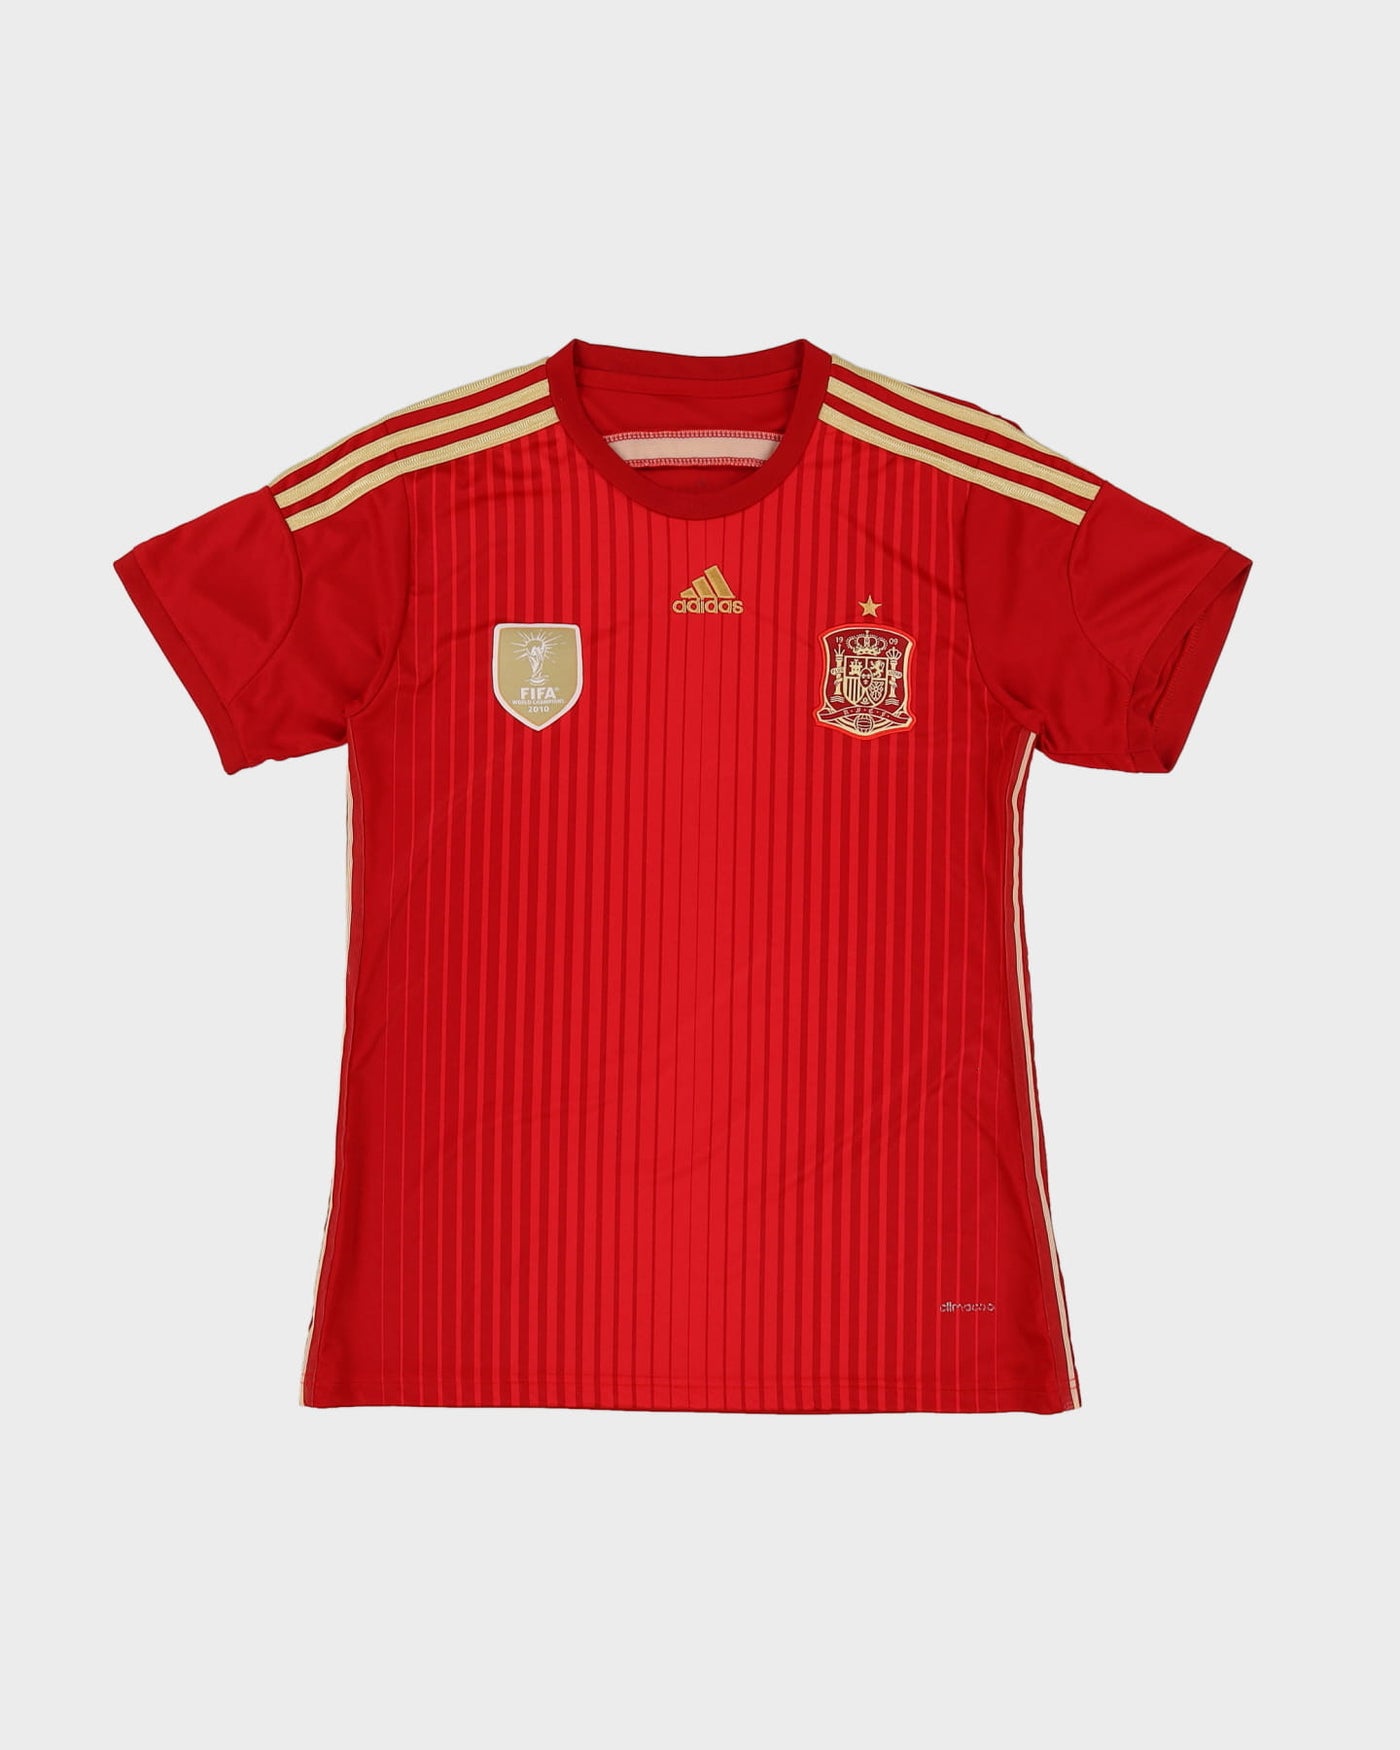 Spain 2010 Champions Red Adidas Football Shirt / Jersey - S